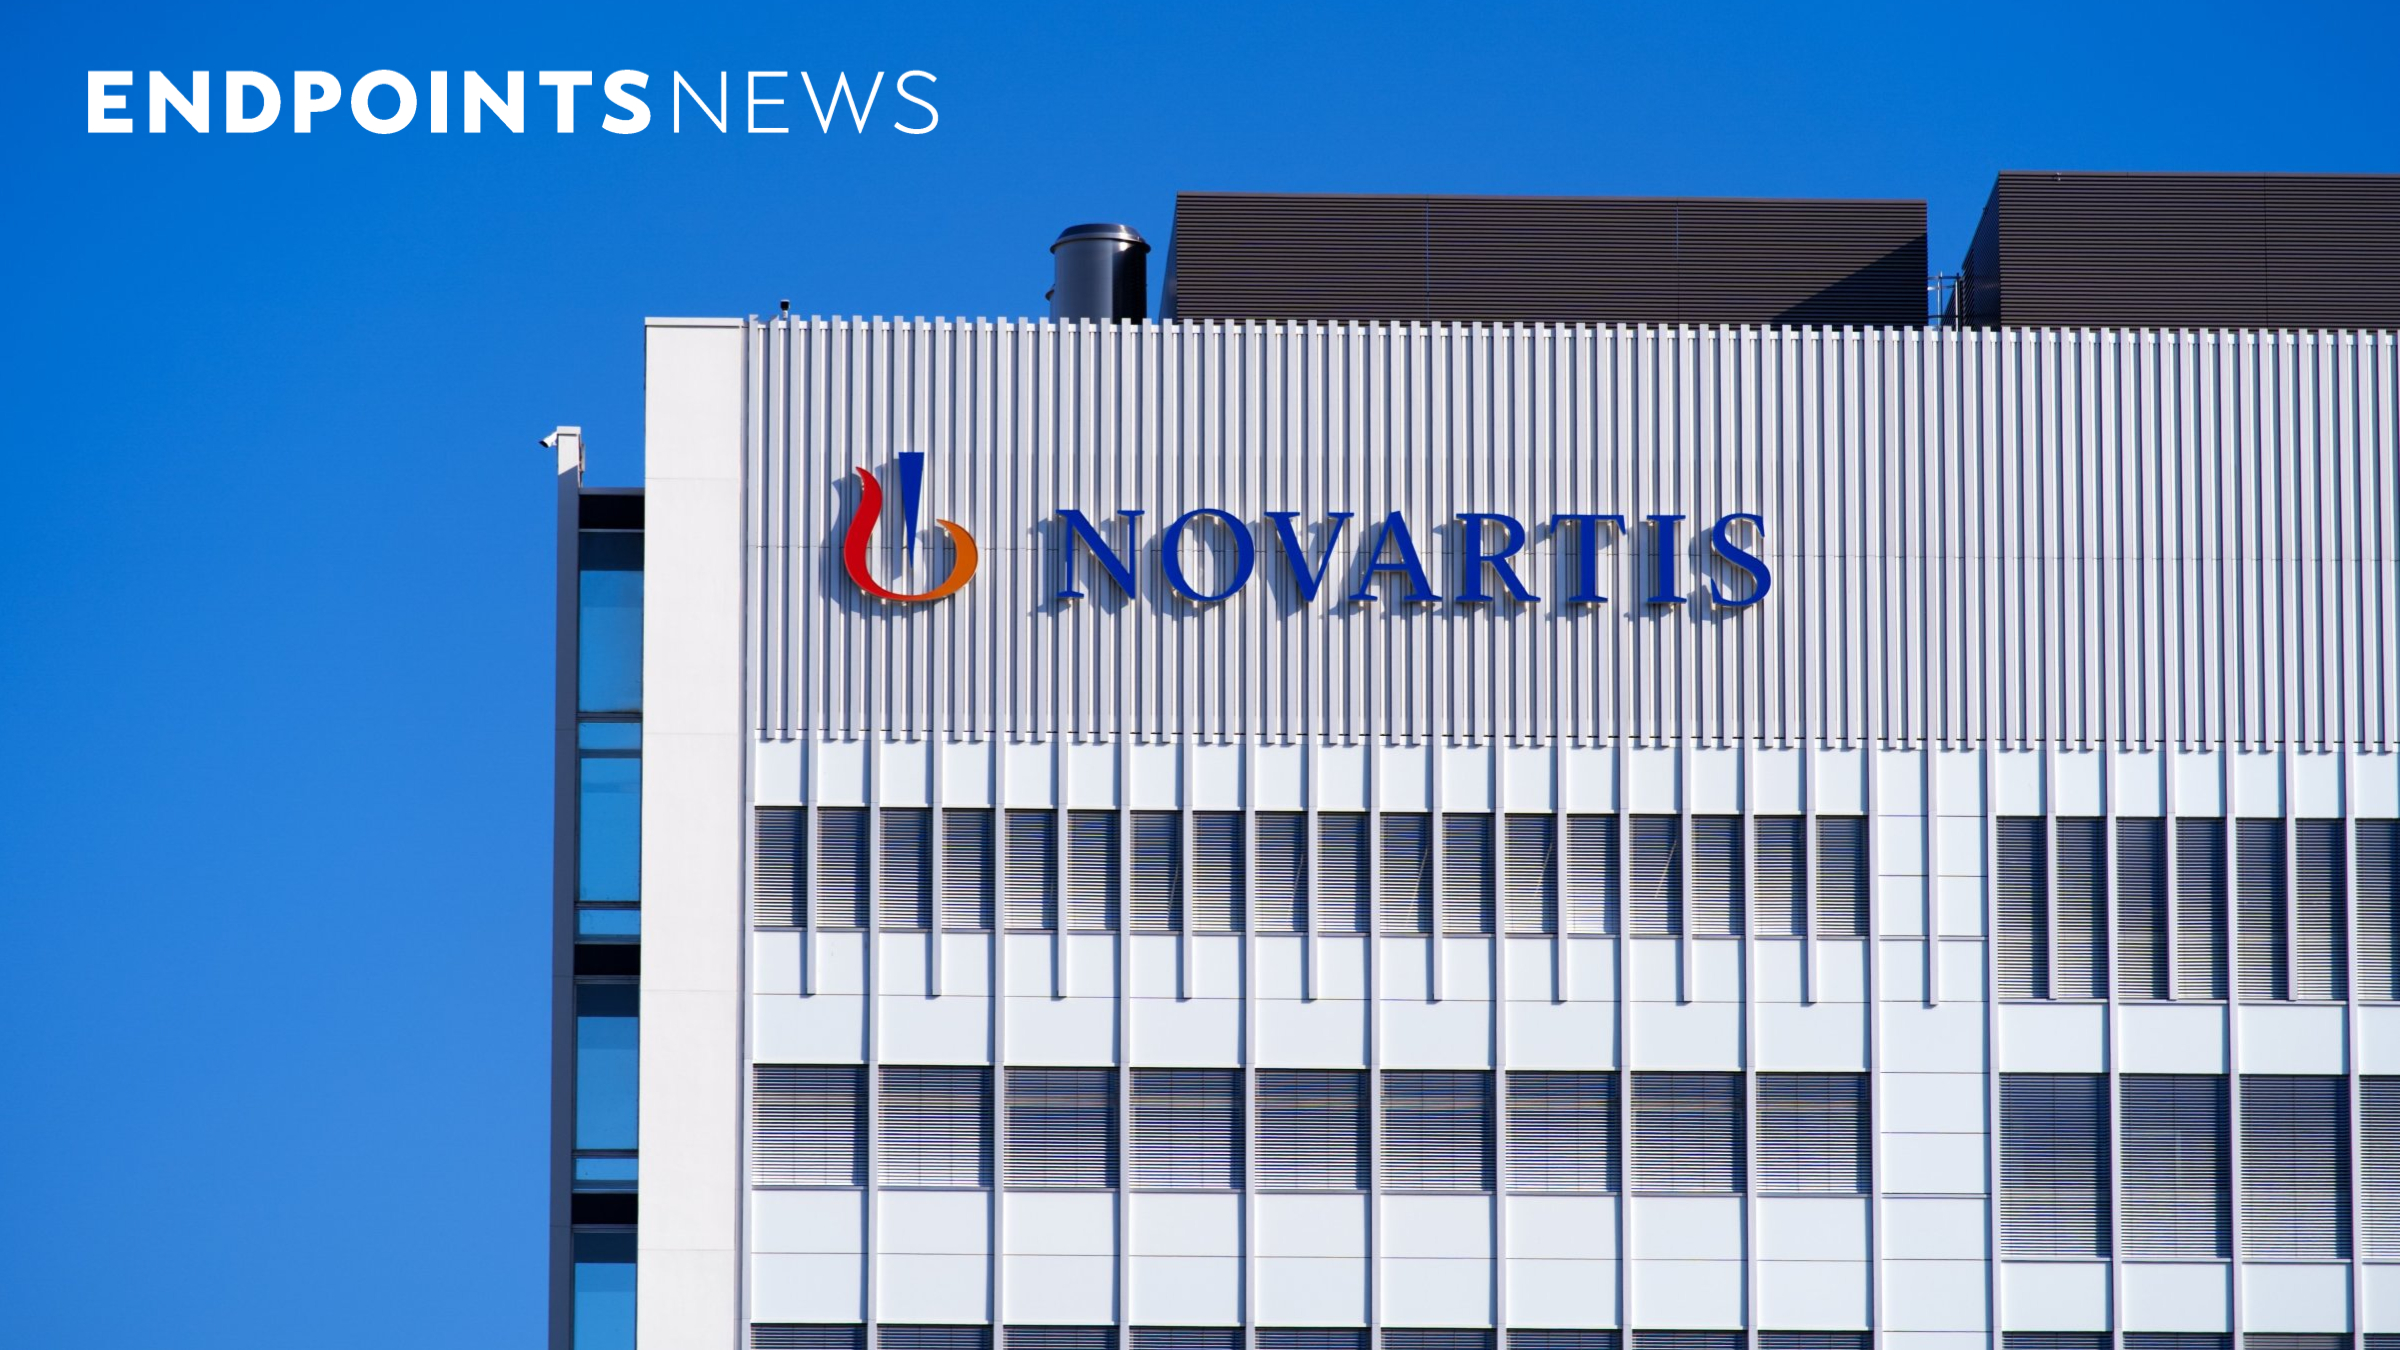 Novartis returns to appellate court, requesting rehearing and reversal in Gilenya patent case